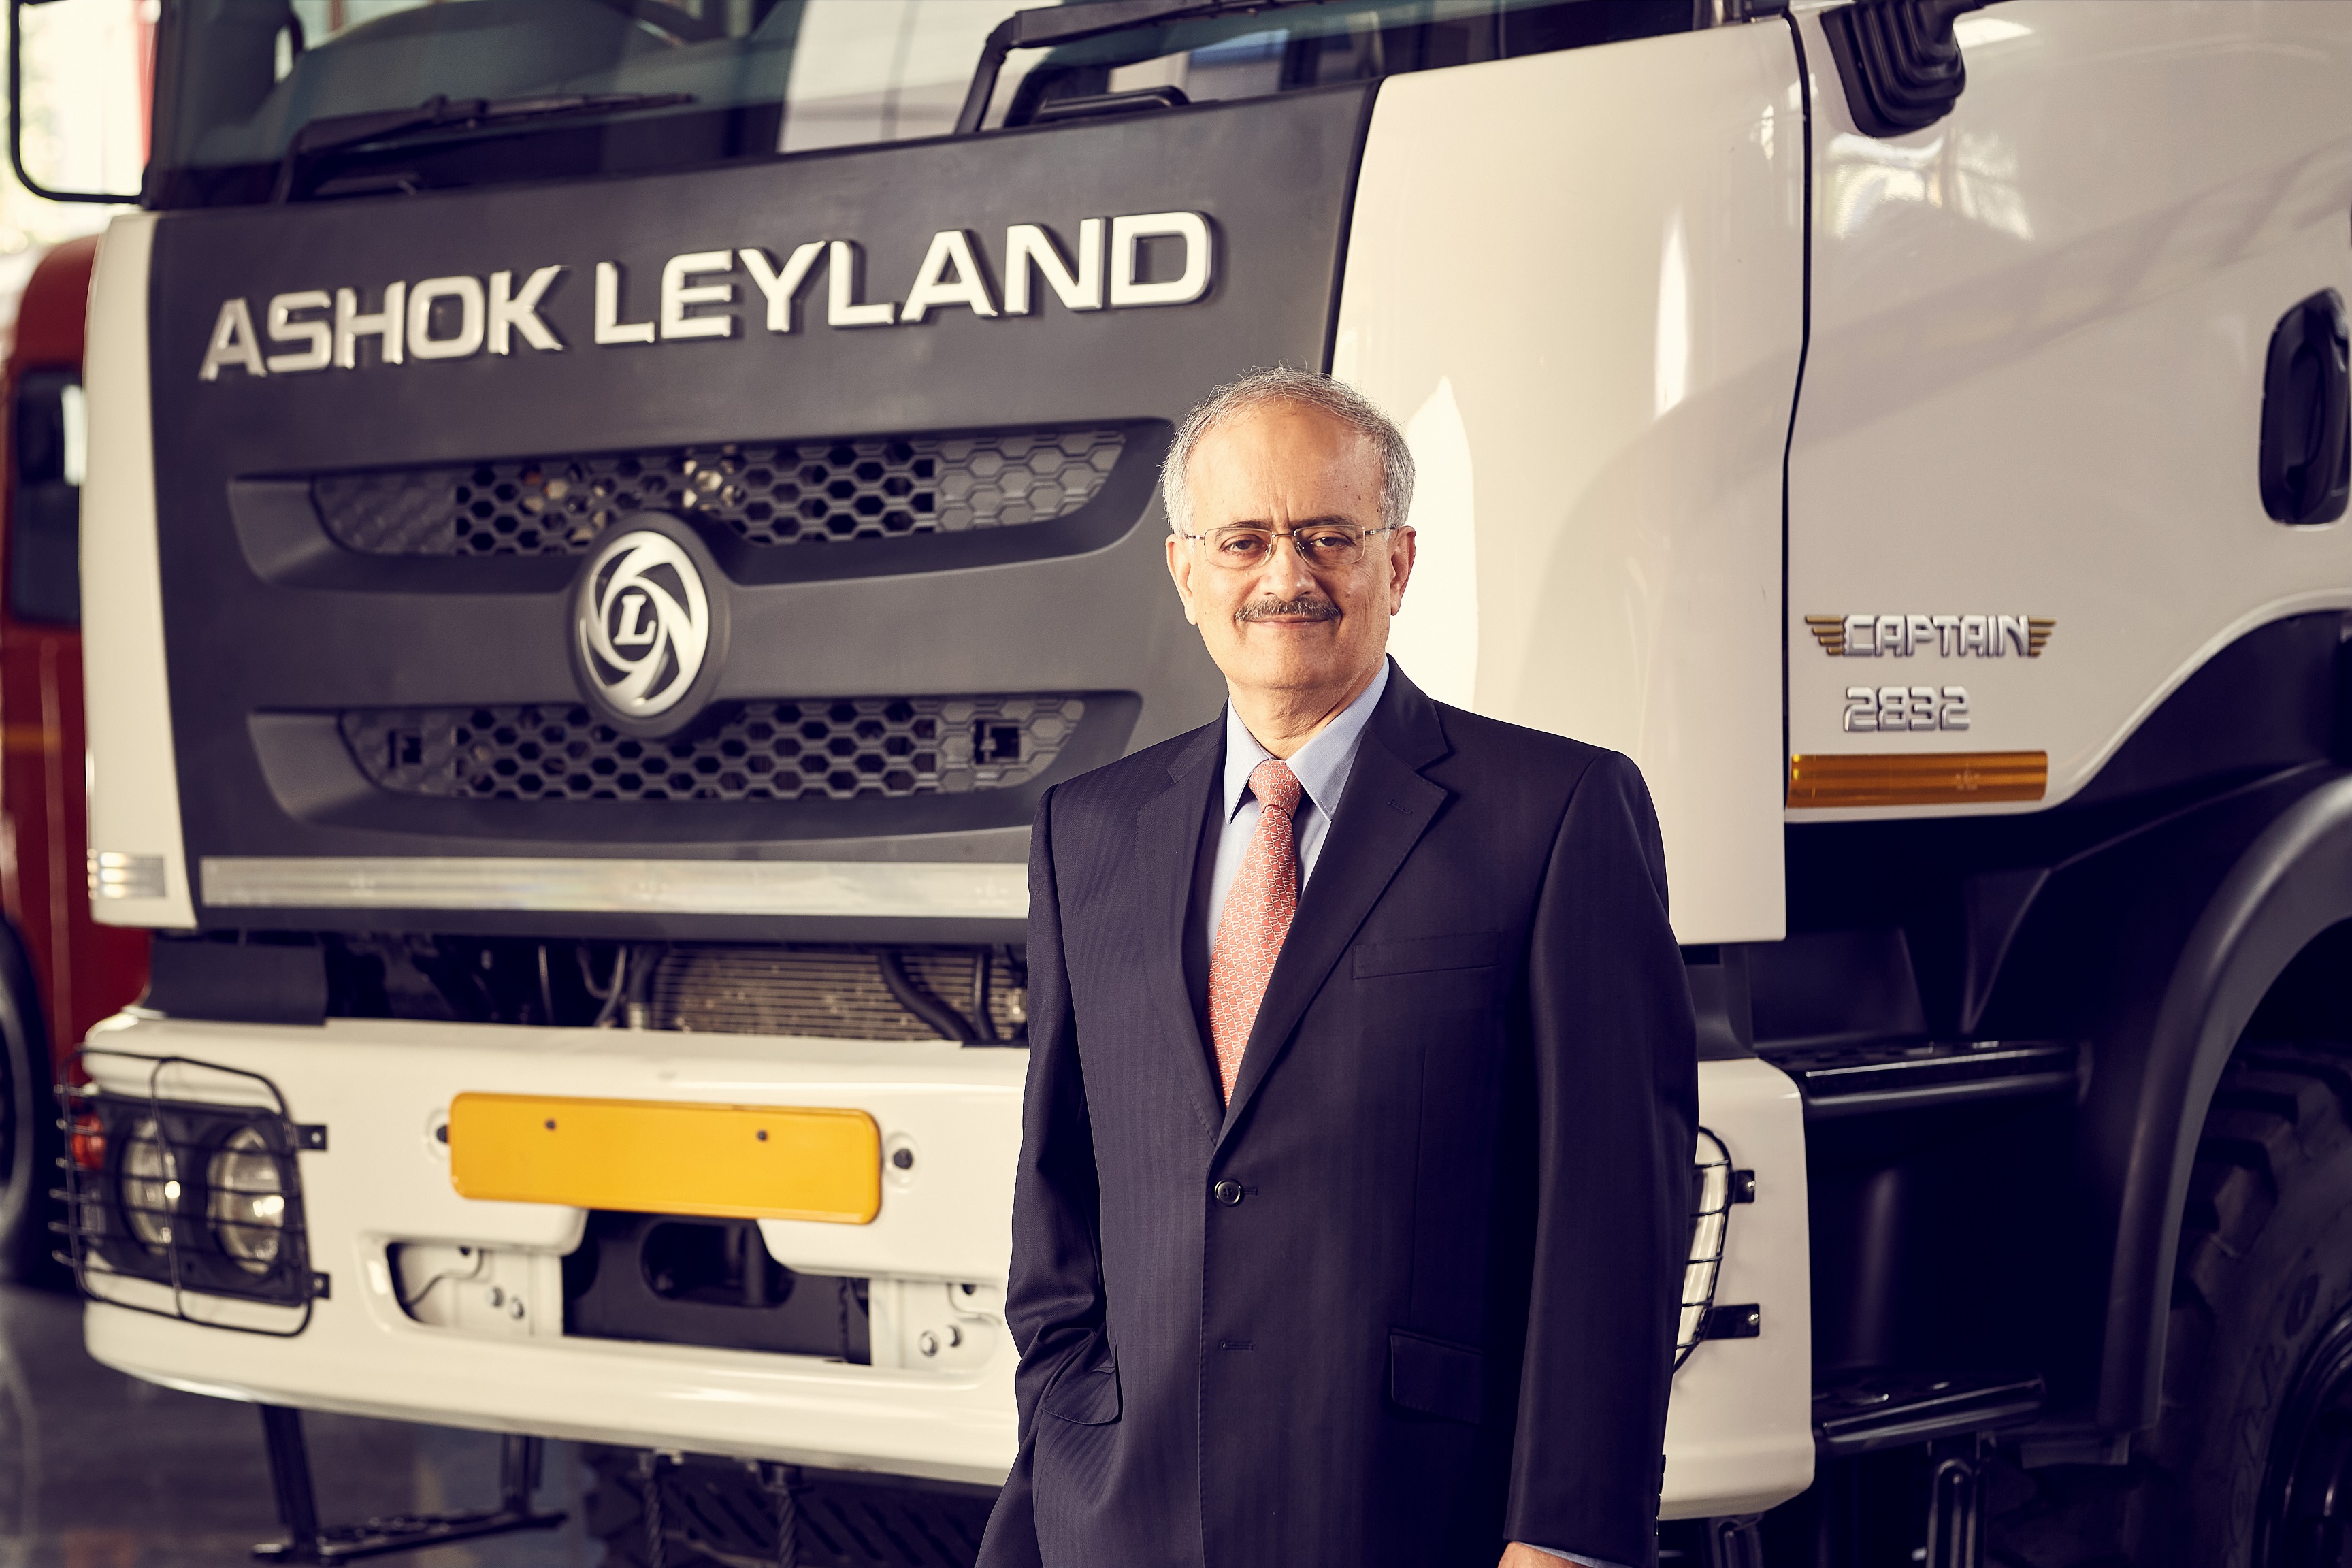 Ashok Leyland forms a New Committee of the Board to drive ESG